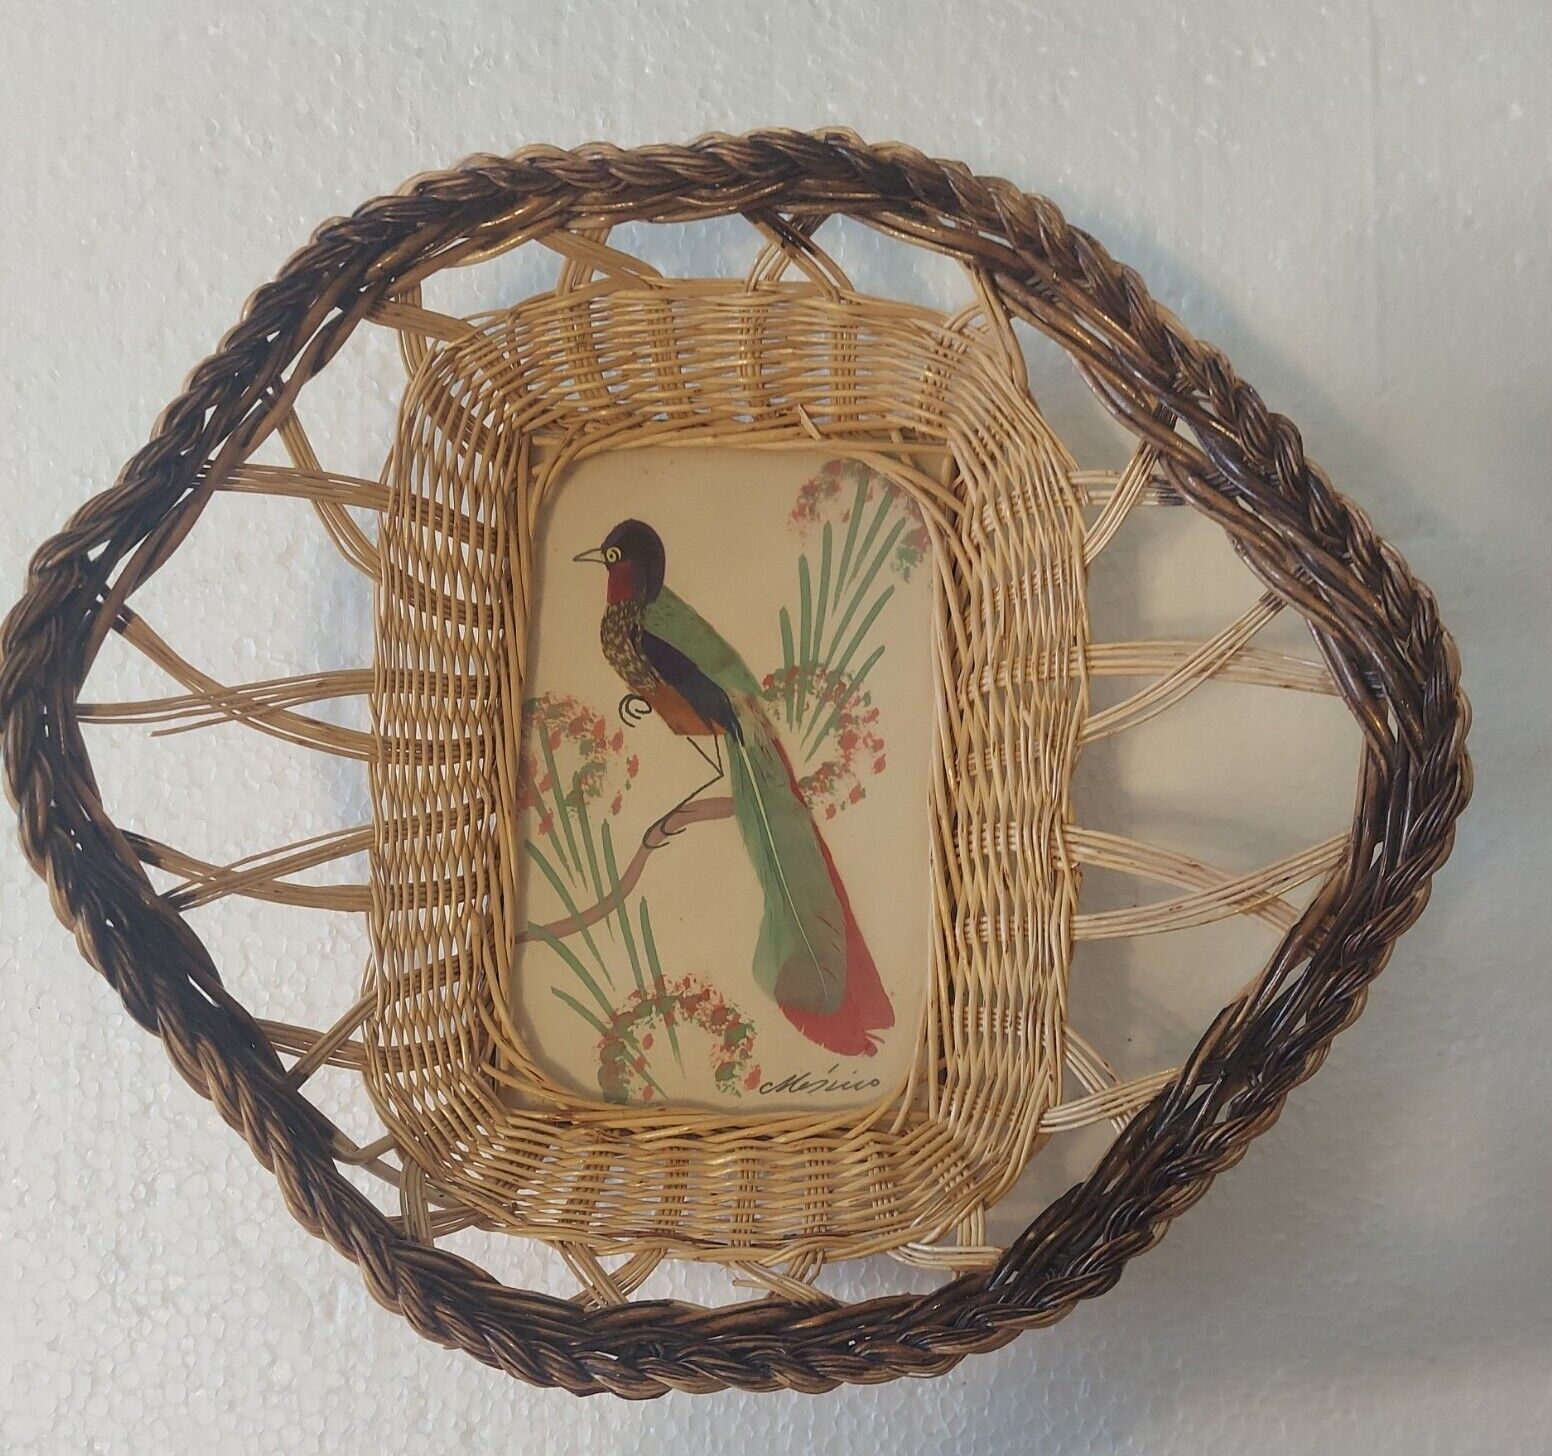 Vintage Mexico Feather Bird Painting Basket Feathercraft Mexican Folk Art AS IS